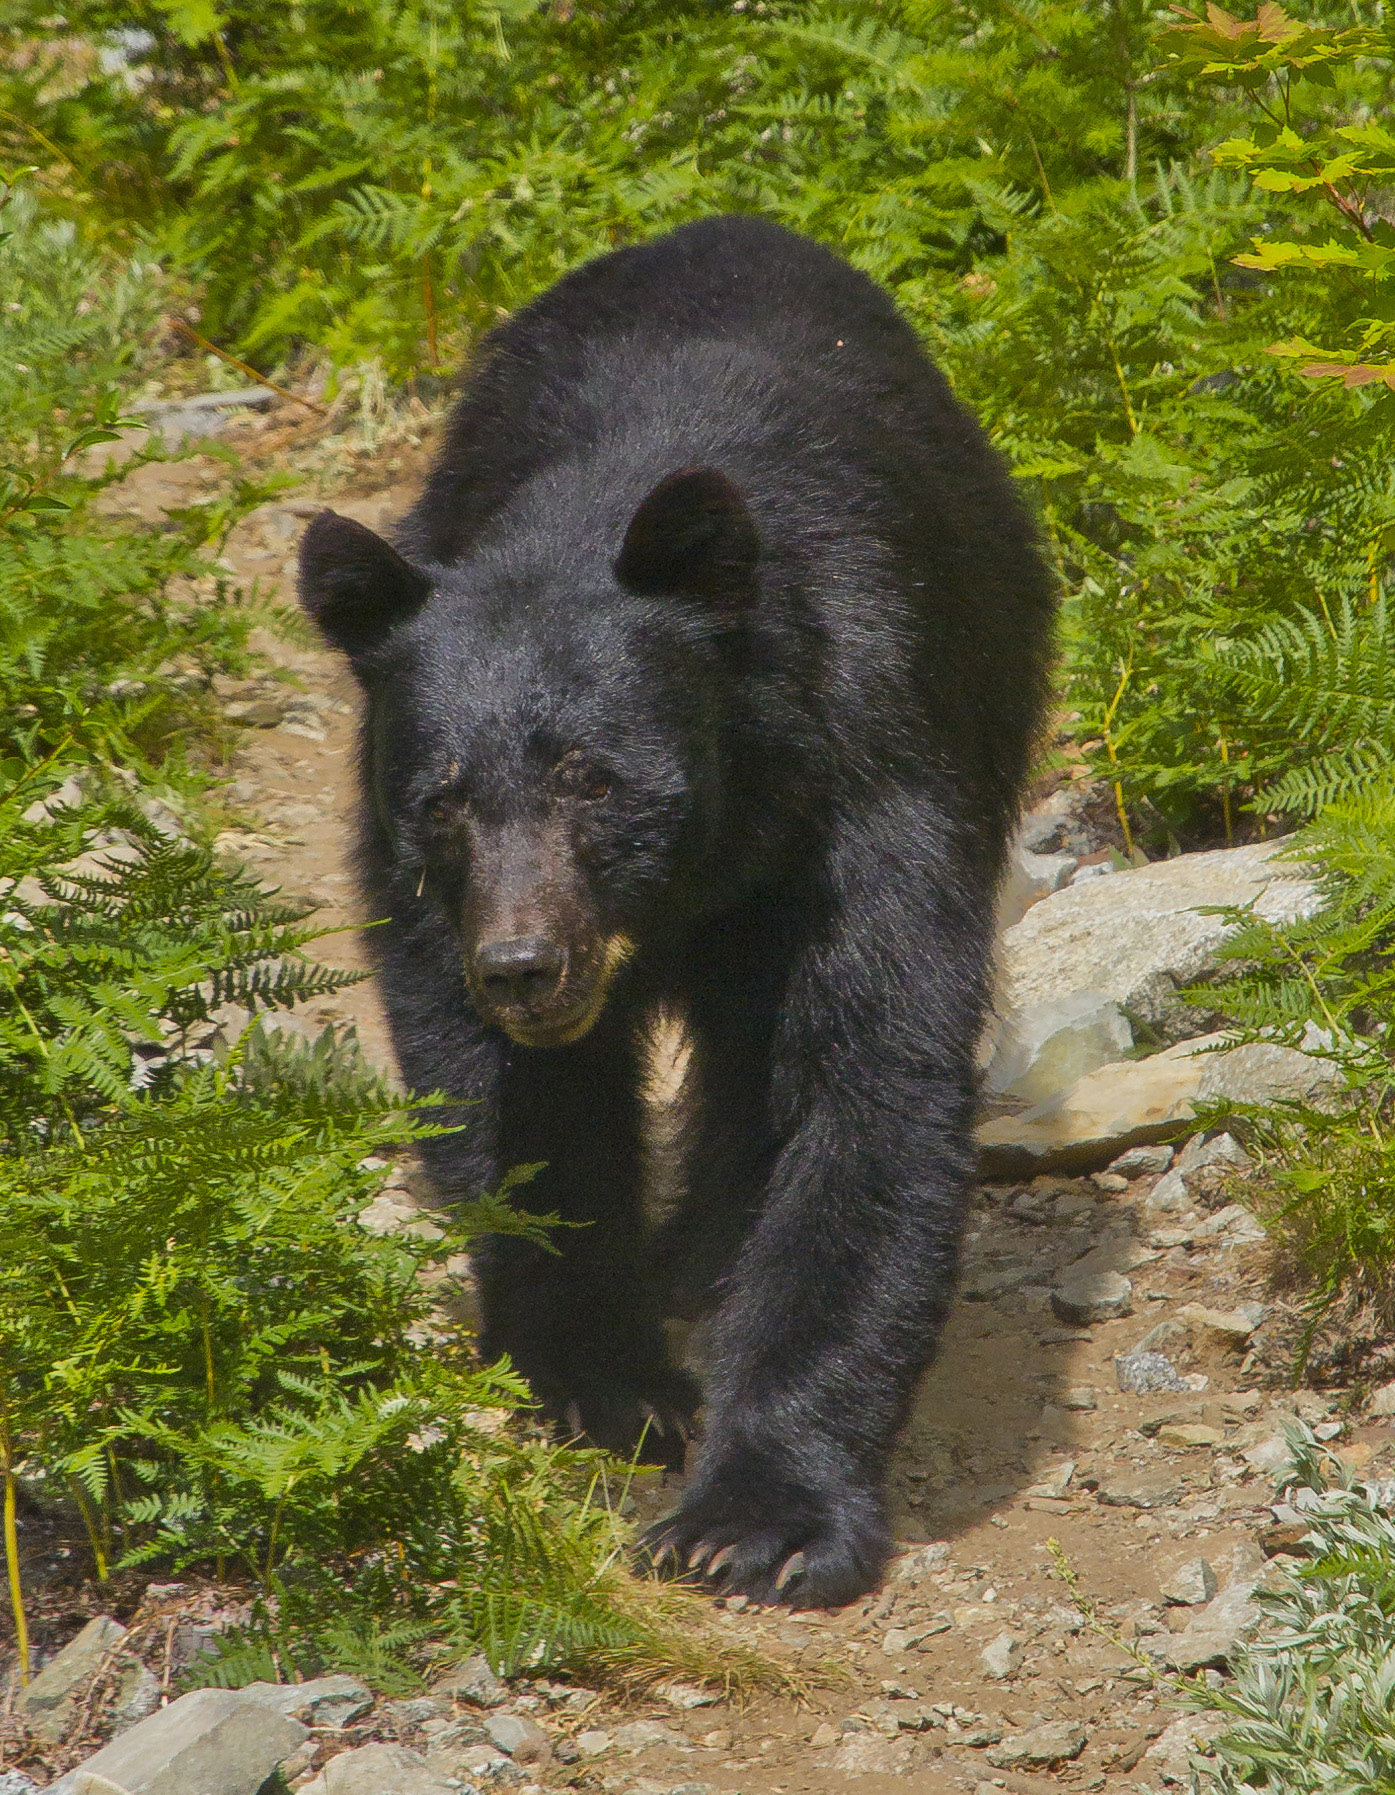 This black bear gets the right-of-way on the trail to Horseshoe Basin in North Cascades National Park, Washington. Photo by Andy Porter via Flickr.